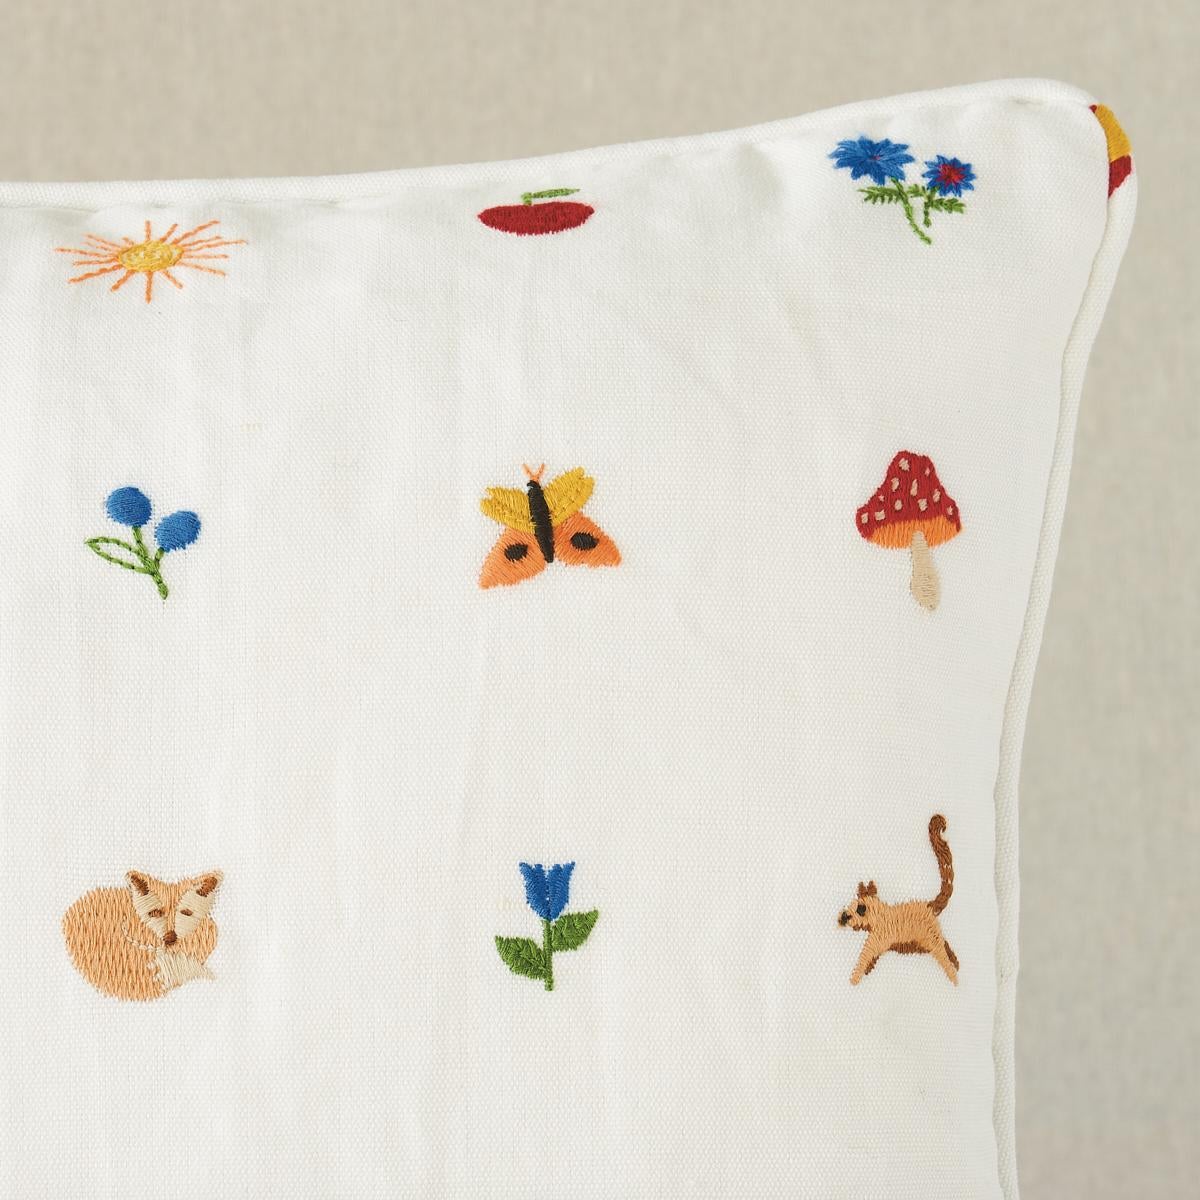 This pillow features Tiny Things Embroidery with a self welt finish. An airy small-scale pattern, multi-colored Tiny Things Embroidery is animated by a charming menagerie of woodland creatures, plants and insects. Pillow includes a feather/down fill